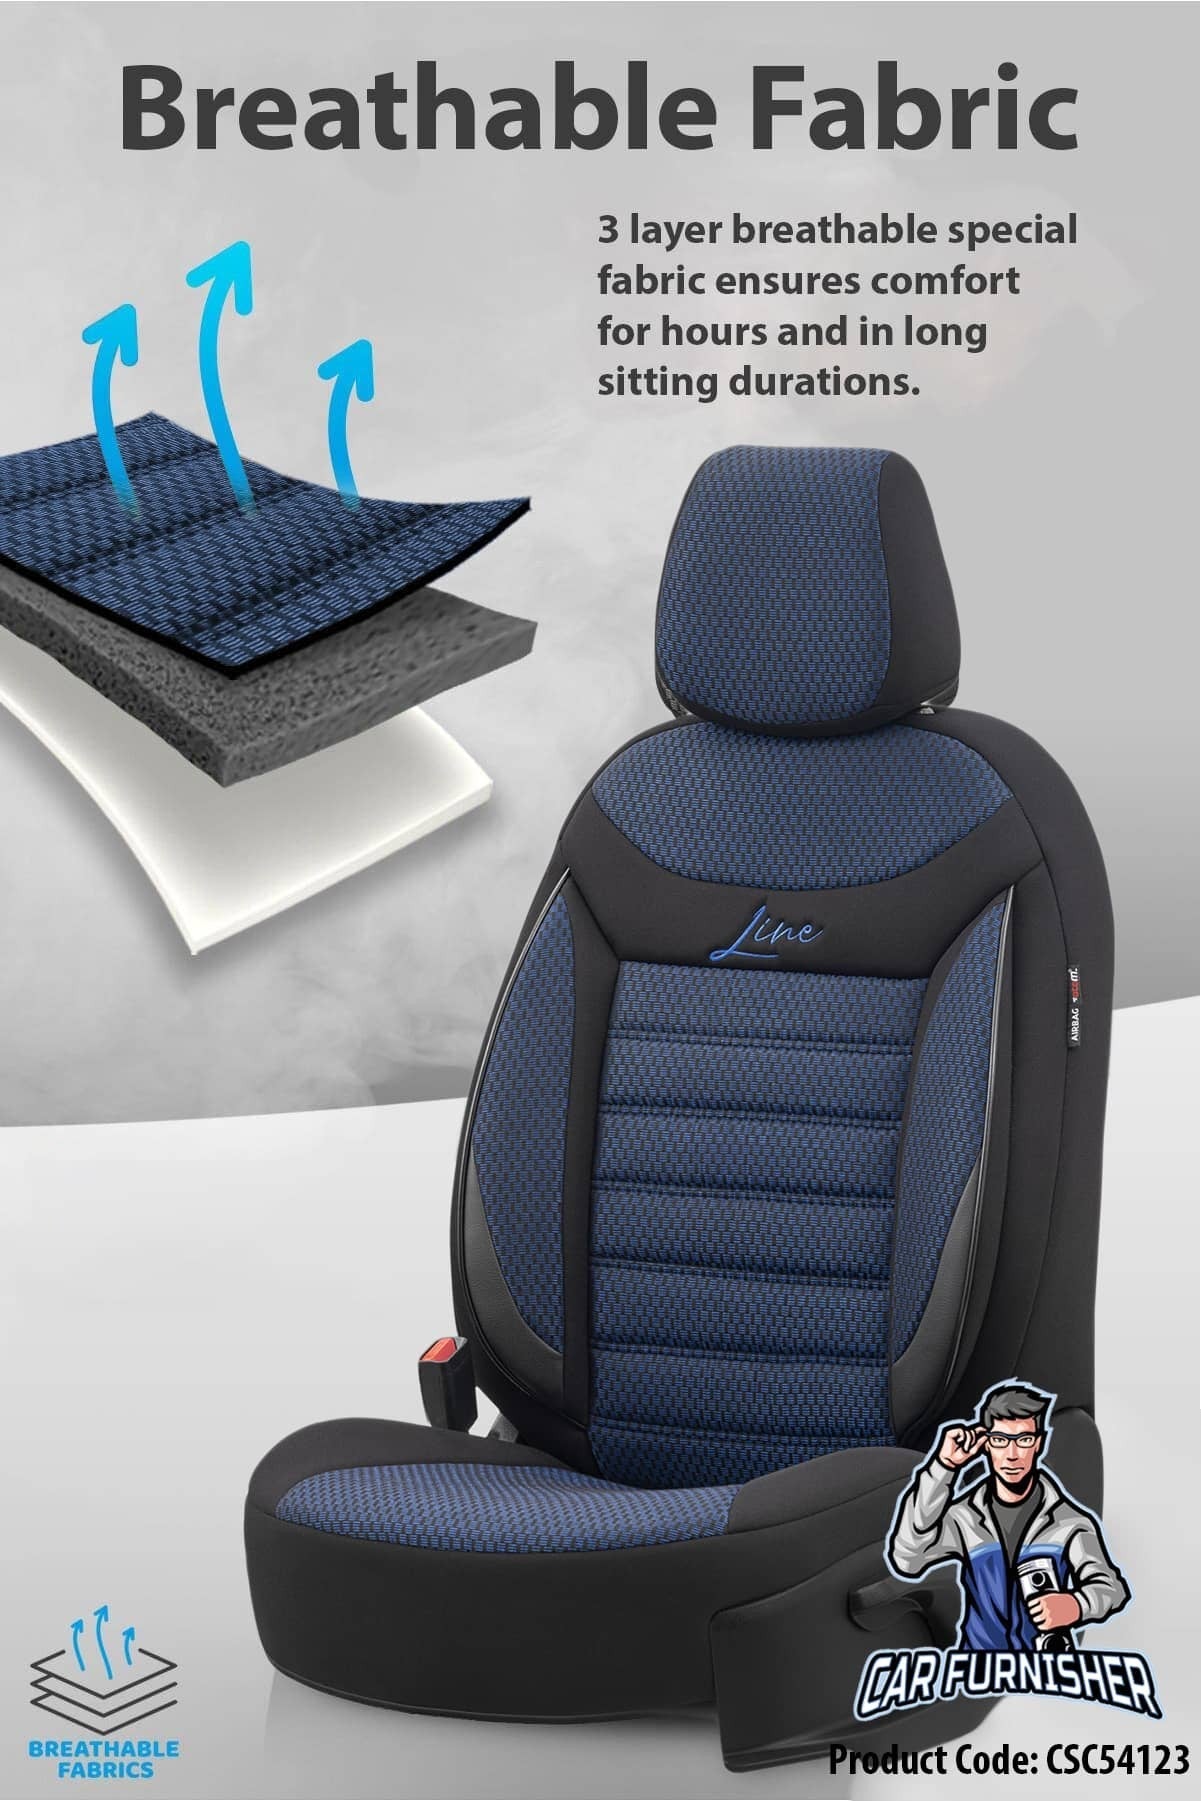 Mercedes 190 Seat Covers Line Design Blue 5 Seats + Headrests (Full Set) Leather & Cotton Fabric